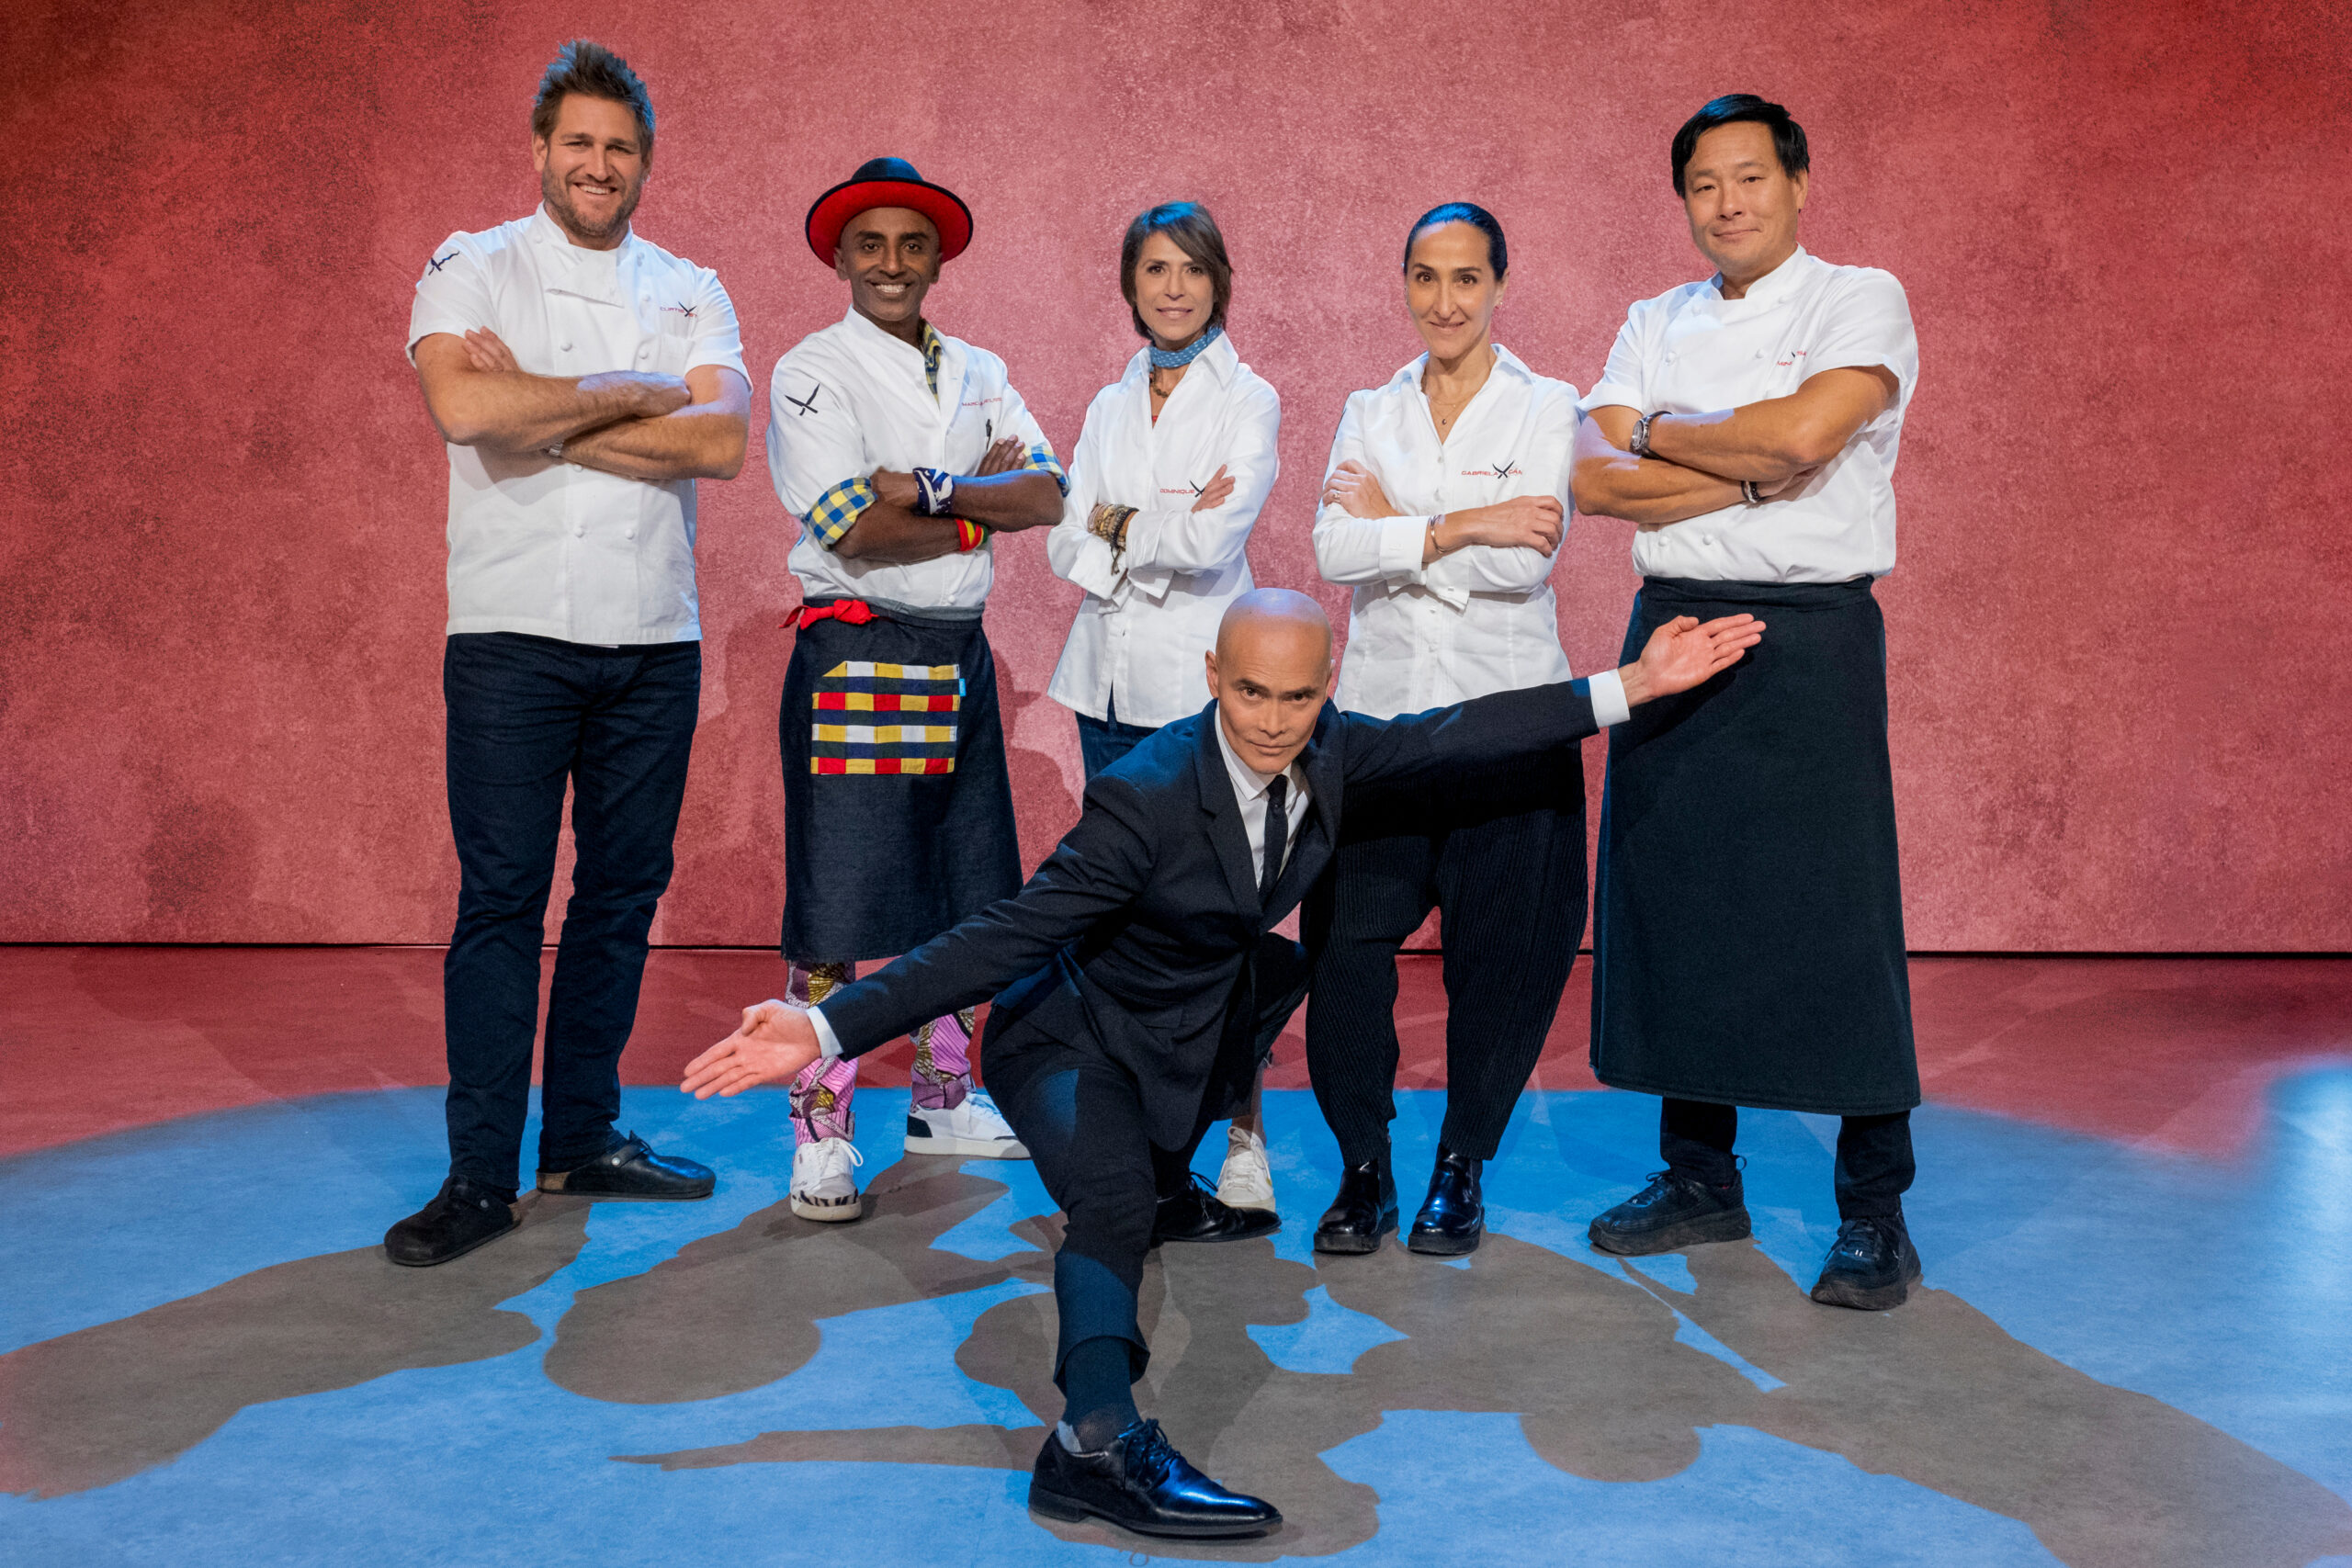 From left to right, Curtis Stone, Marcus Samuelsson, Dominique Crenn, Mark Dacascos, Gabriela Camara, and Ming Tsai on Iron Chef: Quest for an Iron Legend. (Photo Credit: Patrick Wymore/Netflix © 2022)